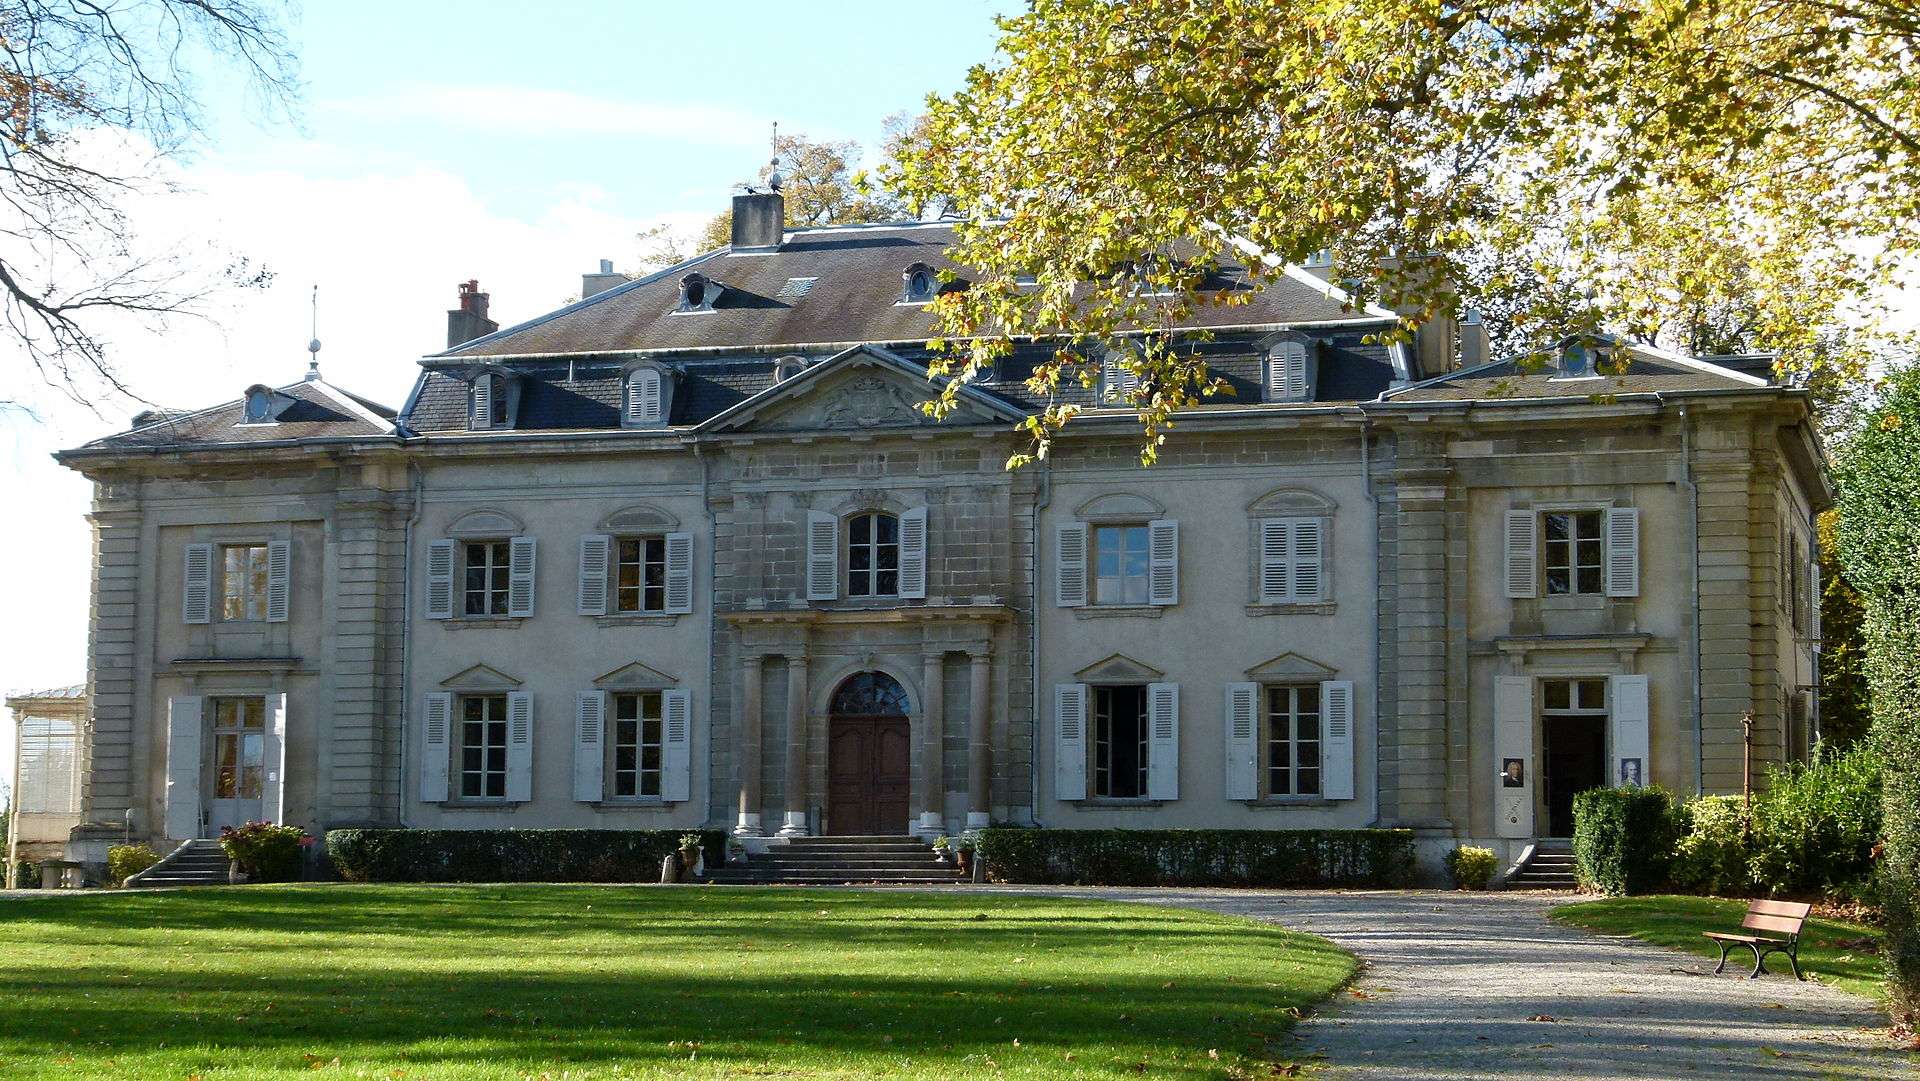 Voltaire's château at Ferney, France